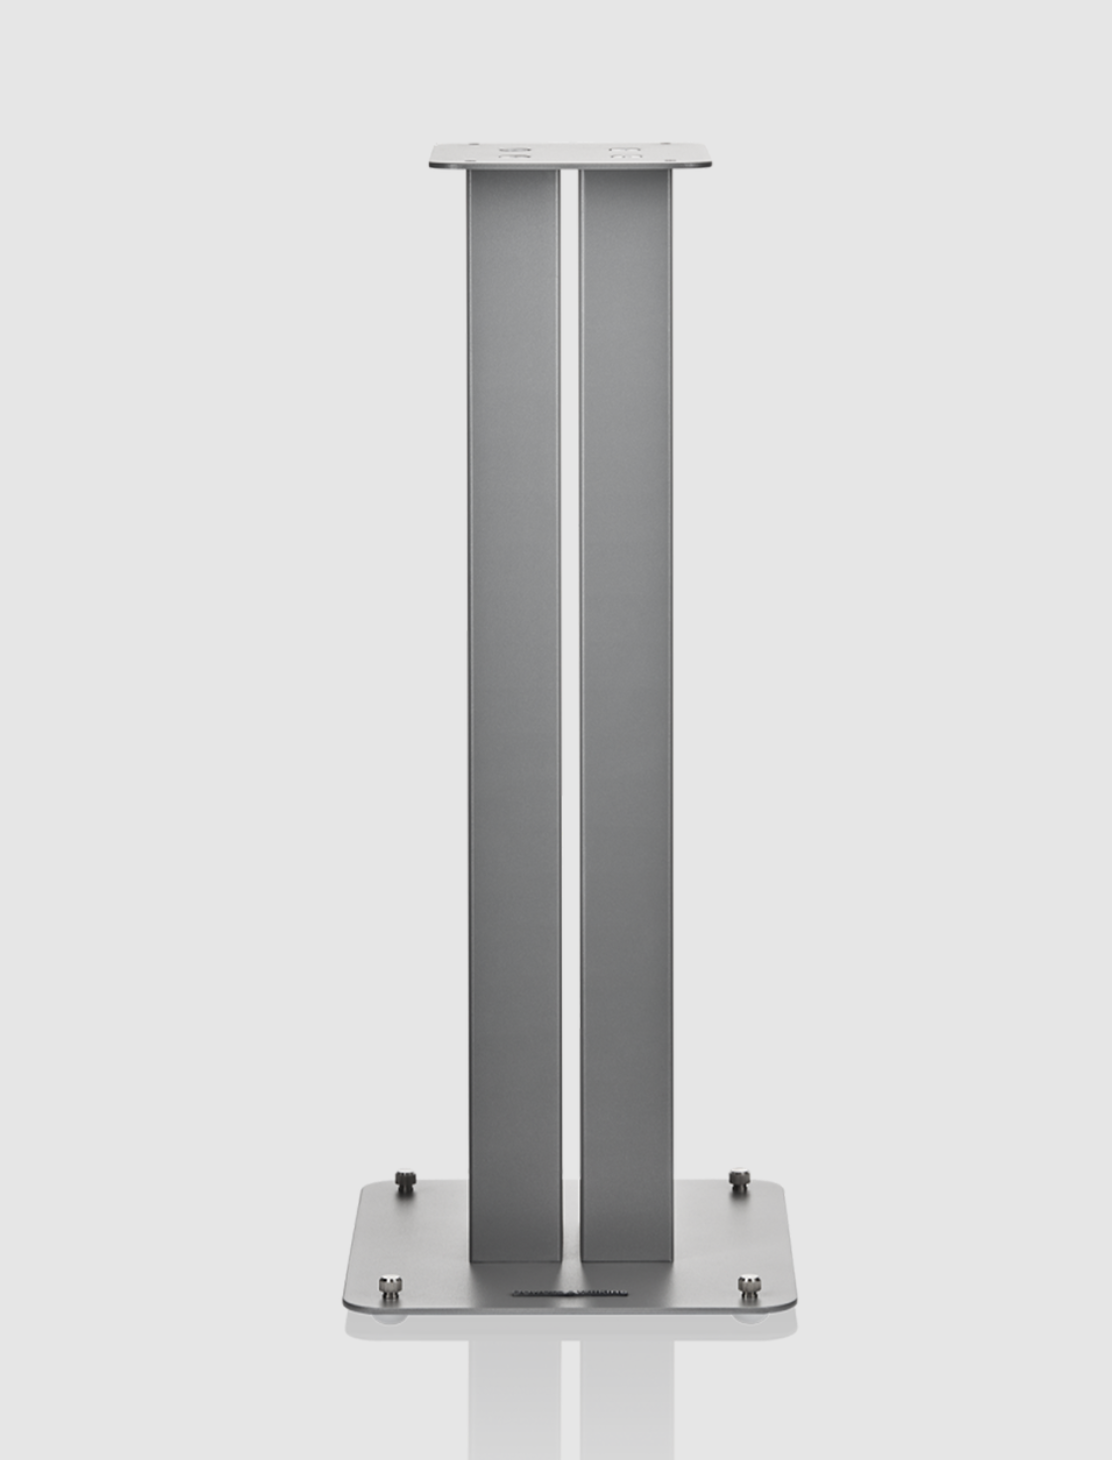 B&W FS600 S3 Speaker Stands in Silver. Front image